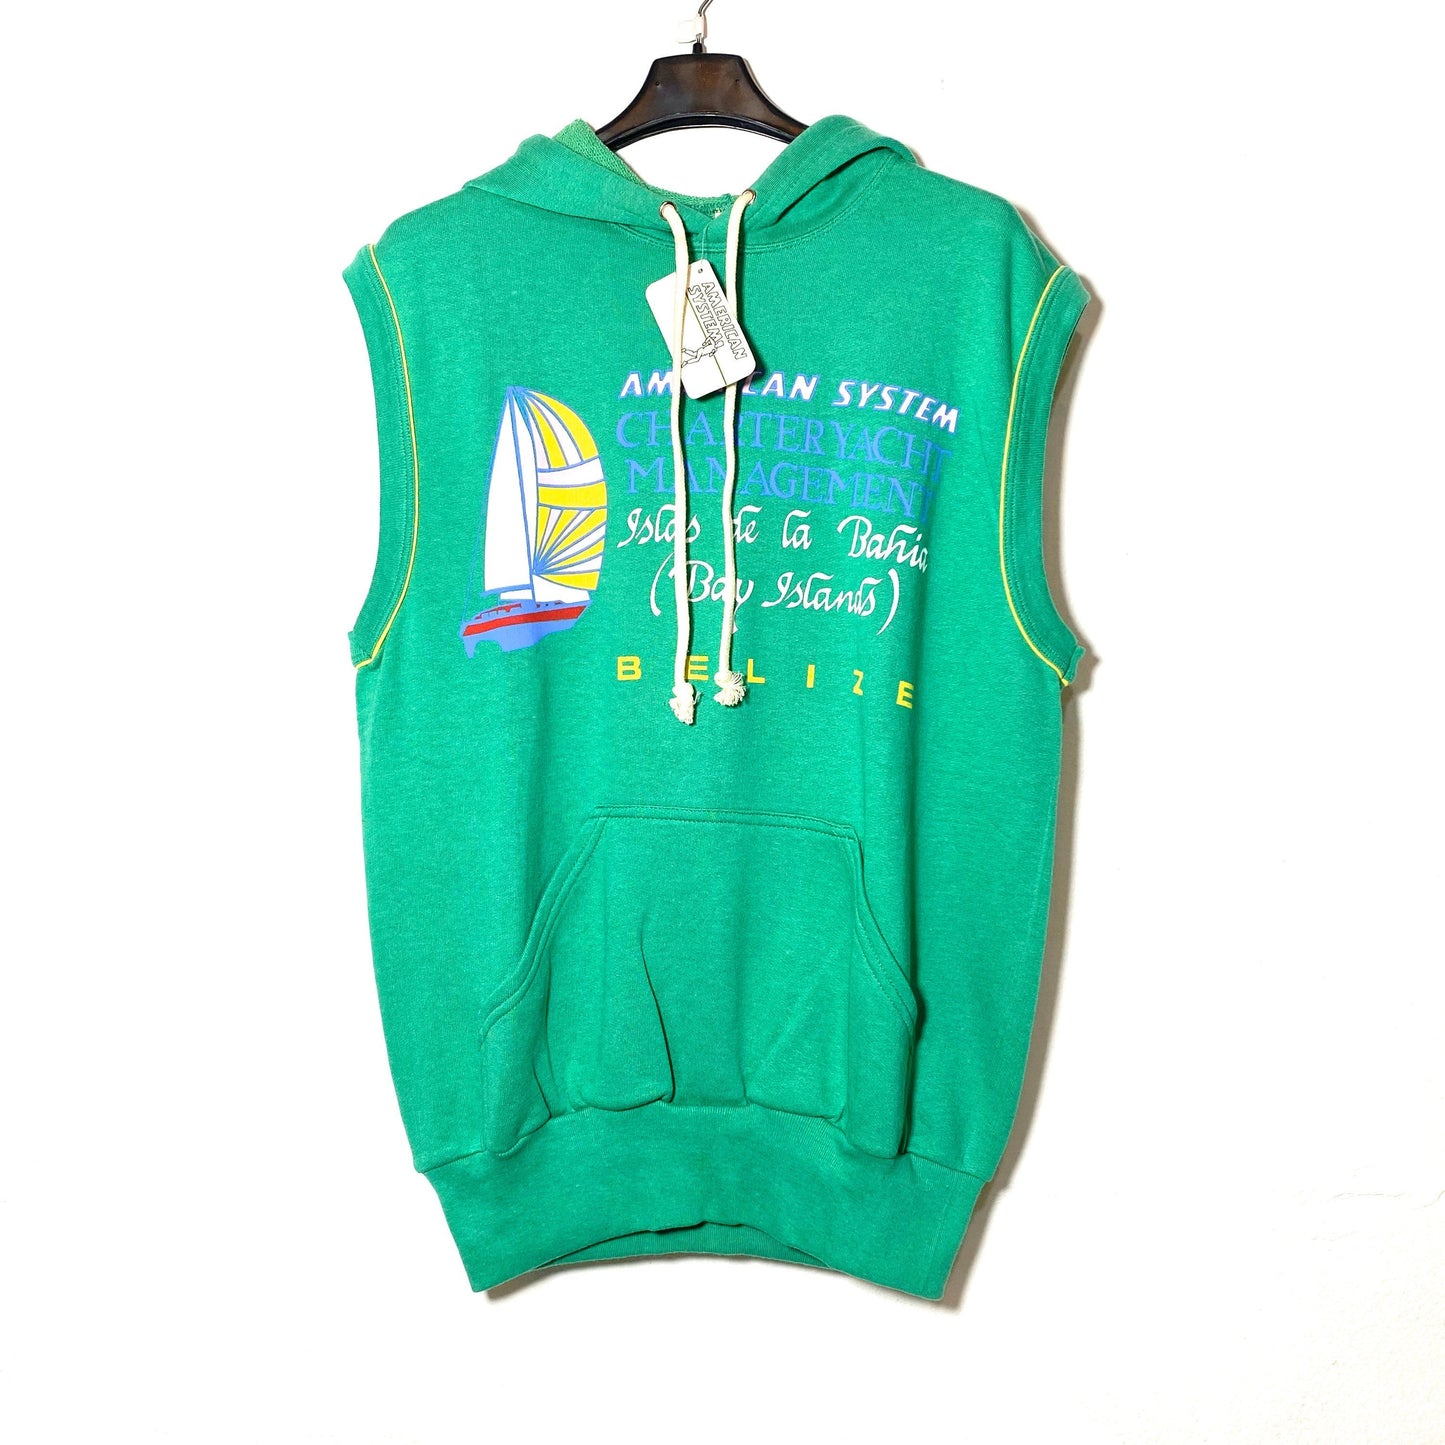 American System NOS 80s green hooded tank top / sweatshirt, new with tags sz S, M, XL